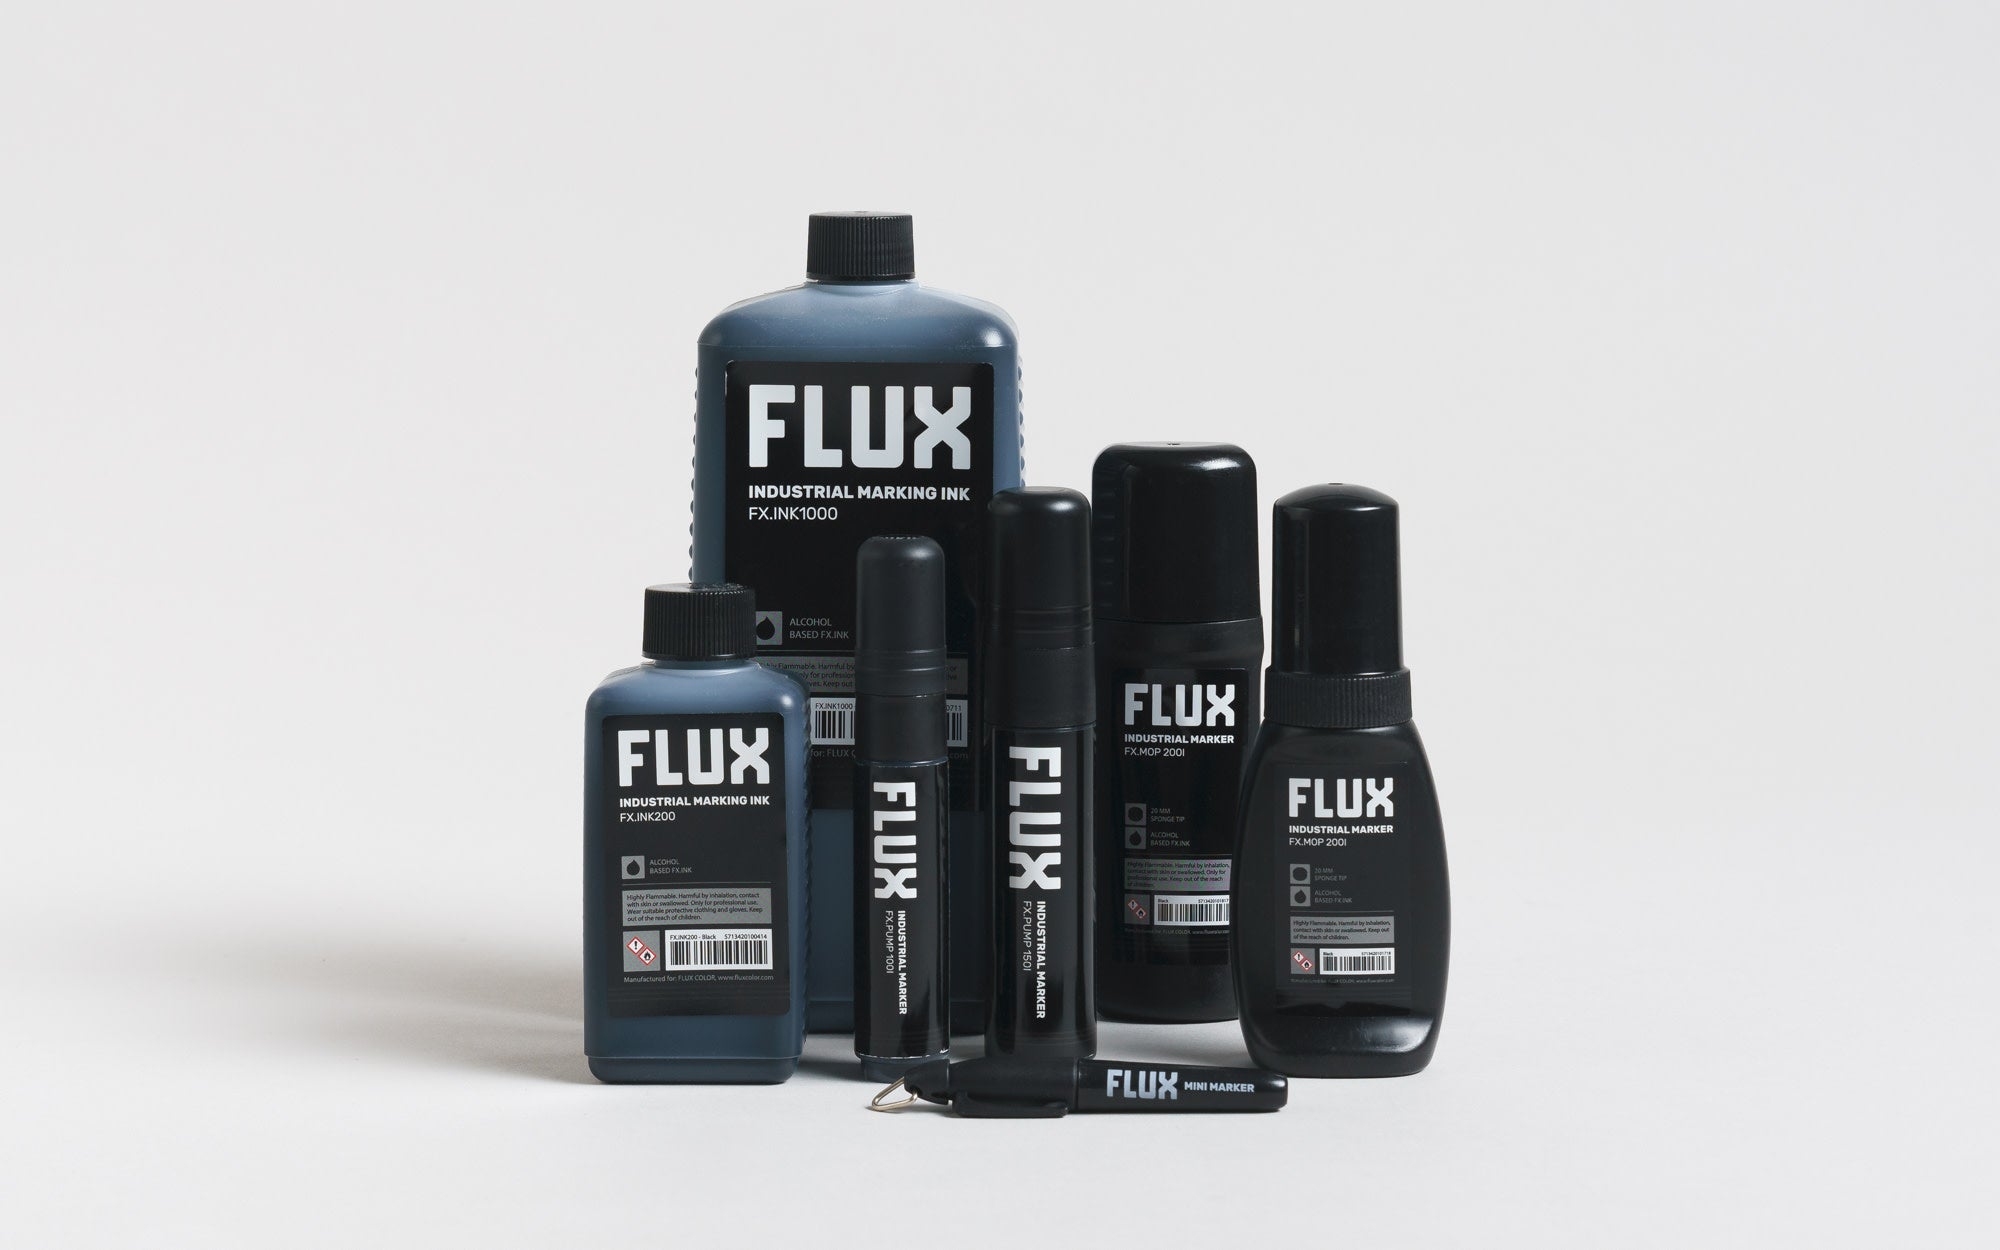 Various Flux products displayed on white surface.